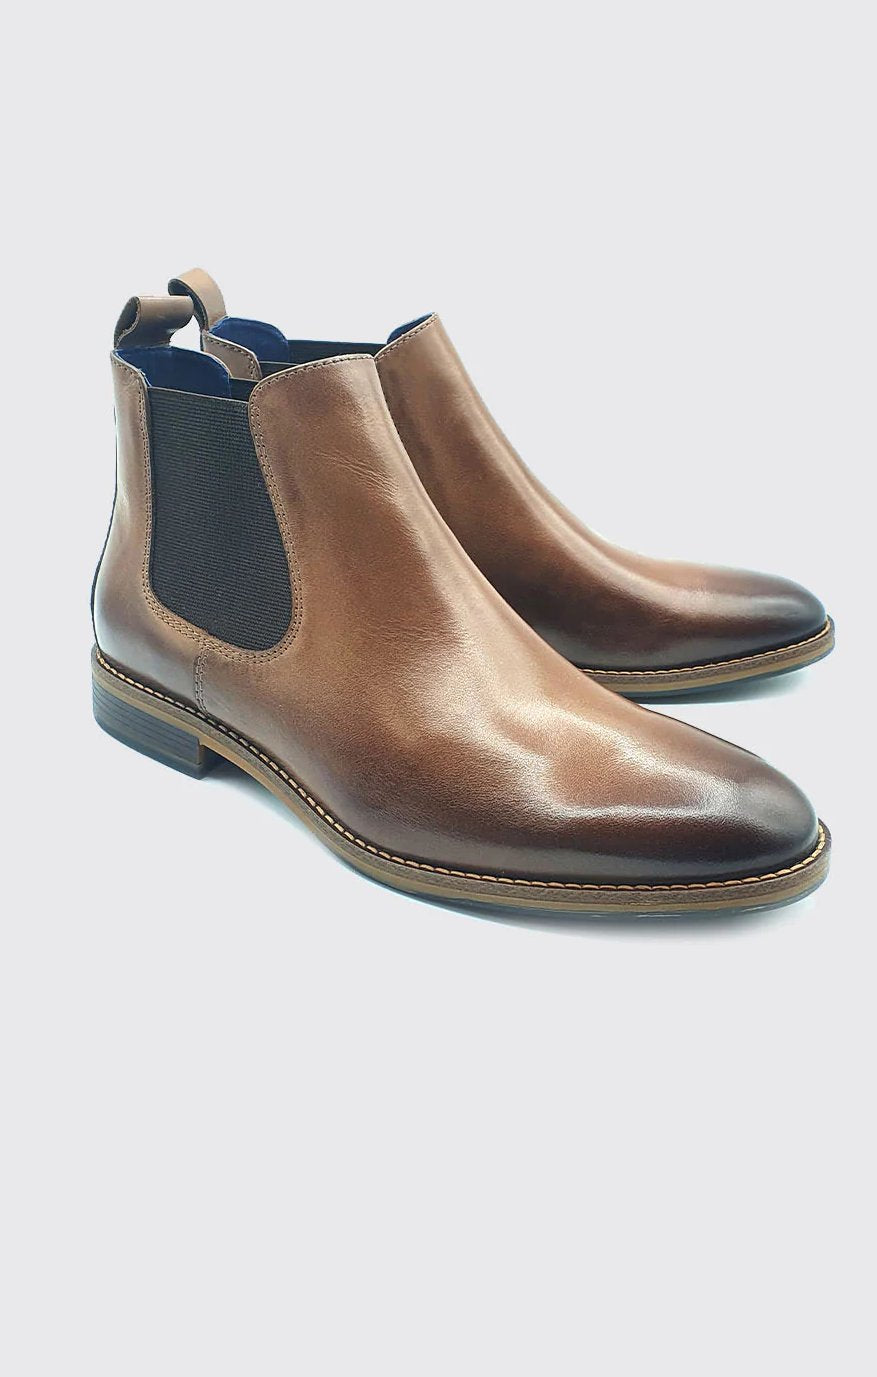 Men's Steed Slip on Tan Boot-Side View with Both Boots